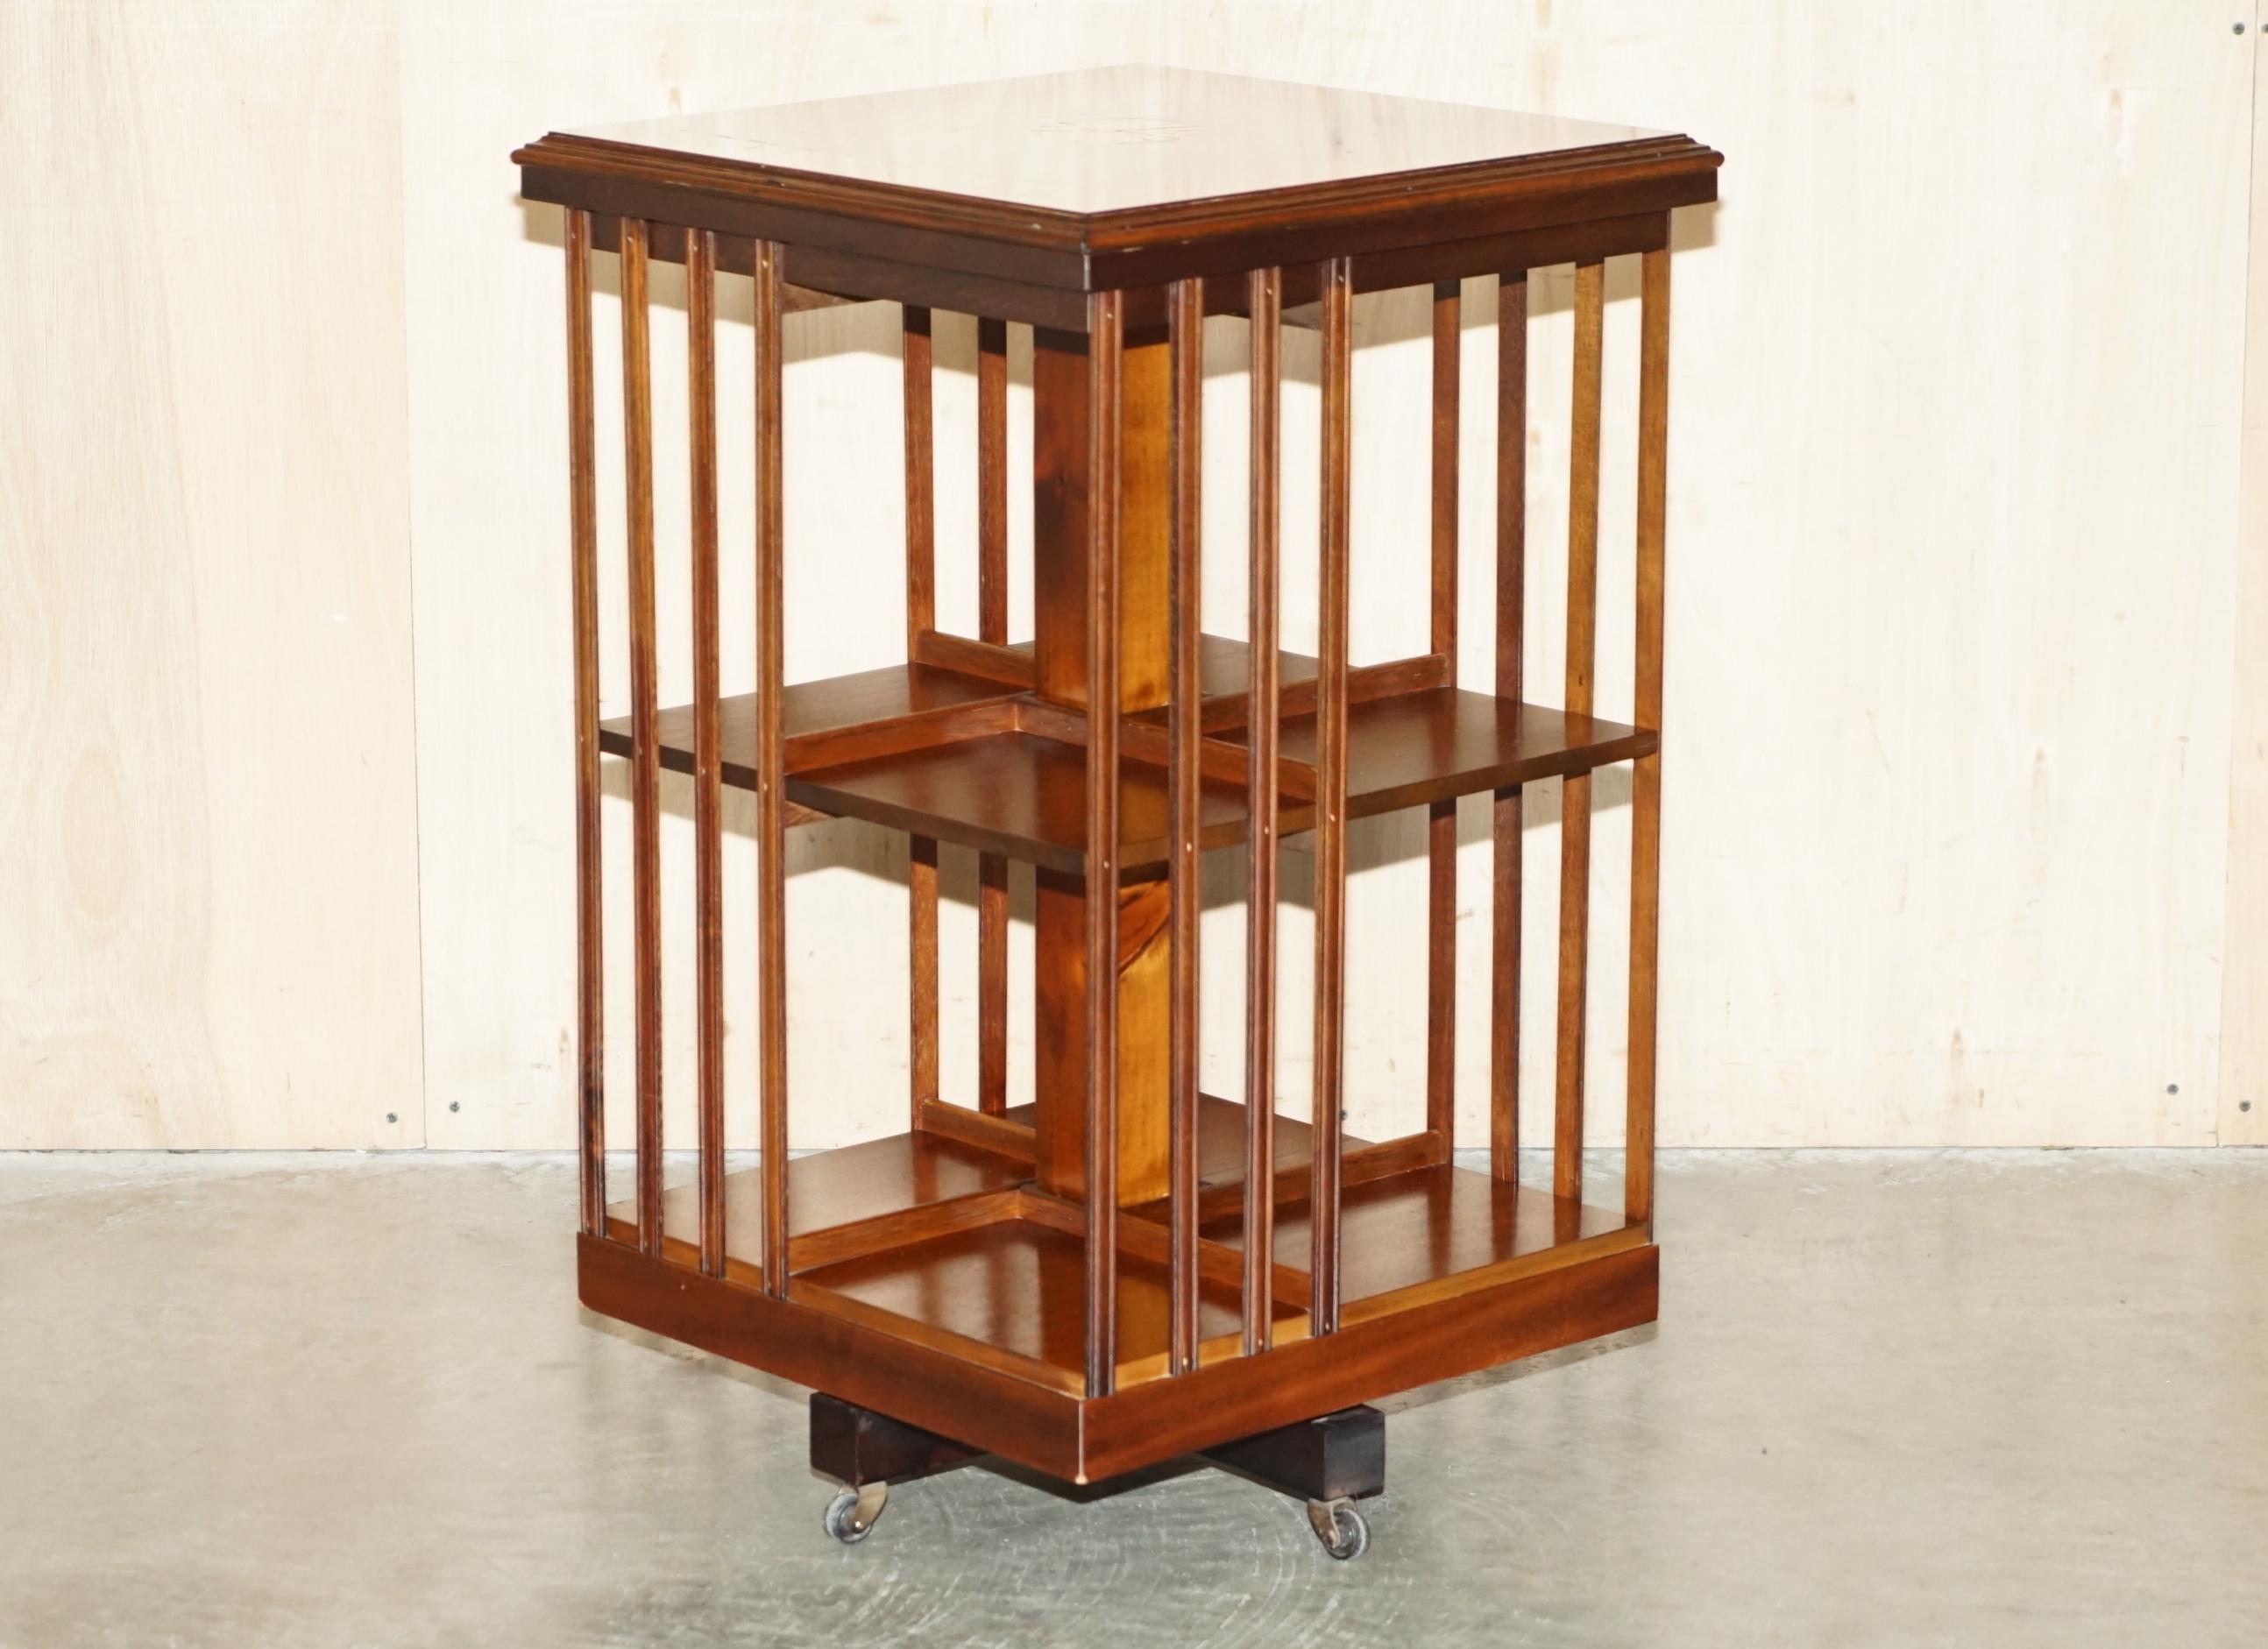 Royal House Antiques

Royal House Antiques is delighted to offer for sale this very fine, antique Sheraton Revival Mahogany, Walnut & Satinwood revolving bookcase table

Please note the delivery fee listed is just a guide, it covers within the M25